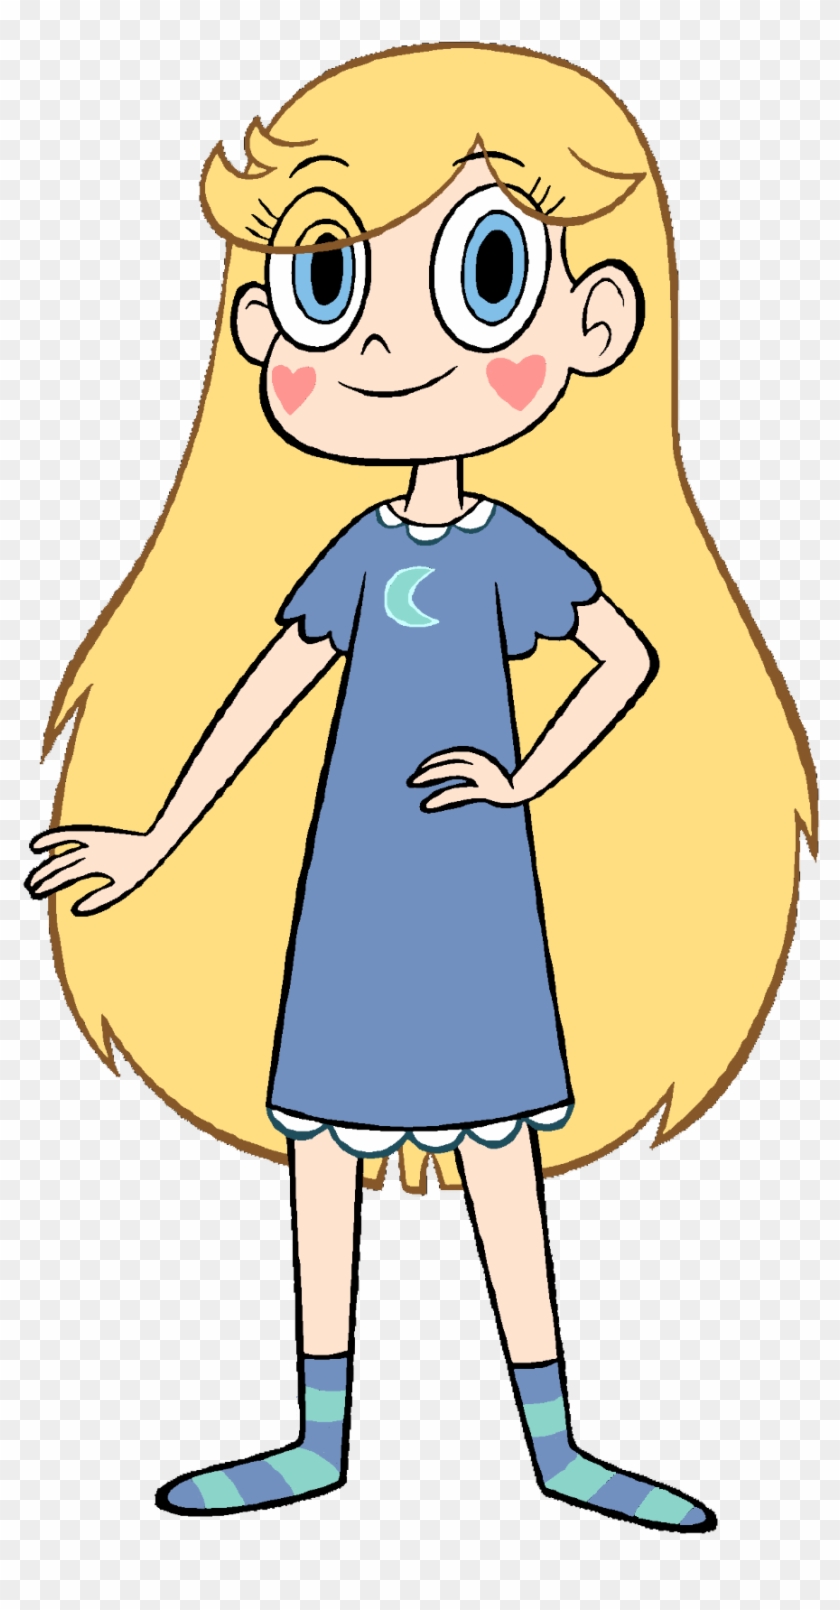 Star Butterfly Pajamas Outfit By Wholuvcartoons Star - Star Vs The Forces Of Evil Characters Star #1624989